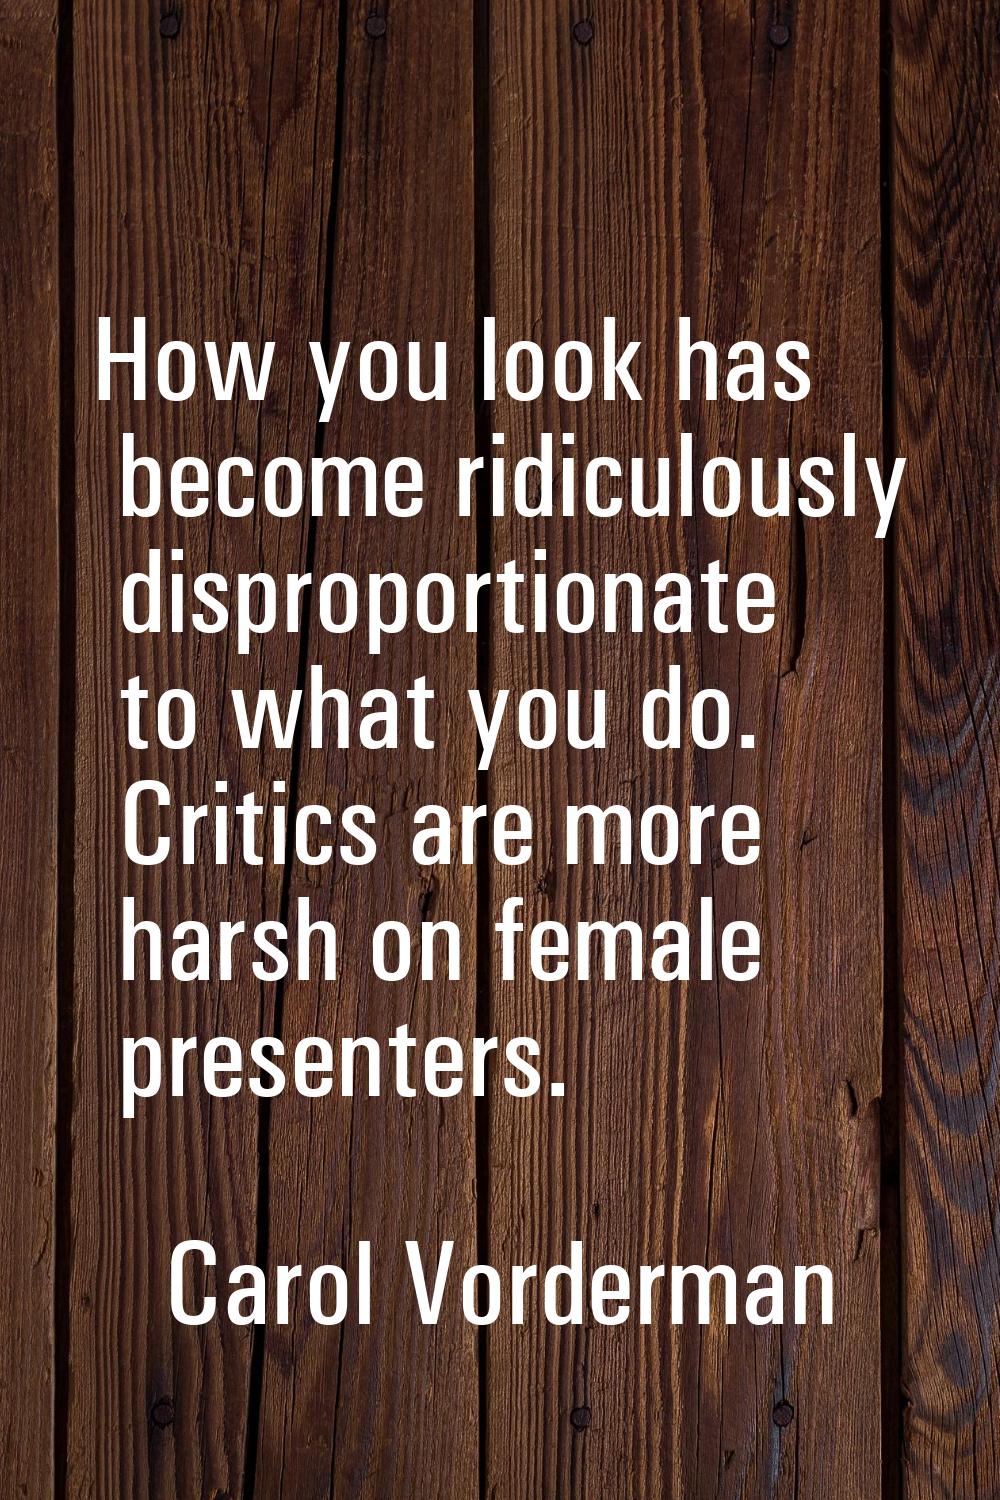 How you look has become ridiculously disproportionate to what you do. Critics are more harsh on fem